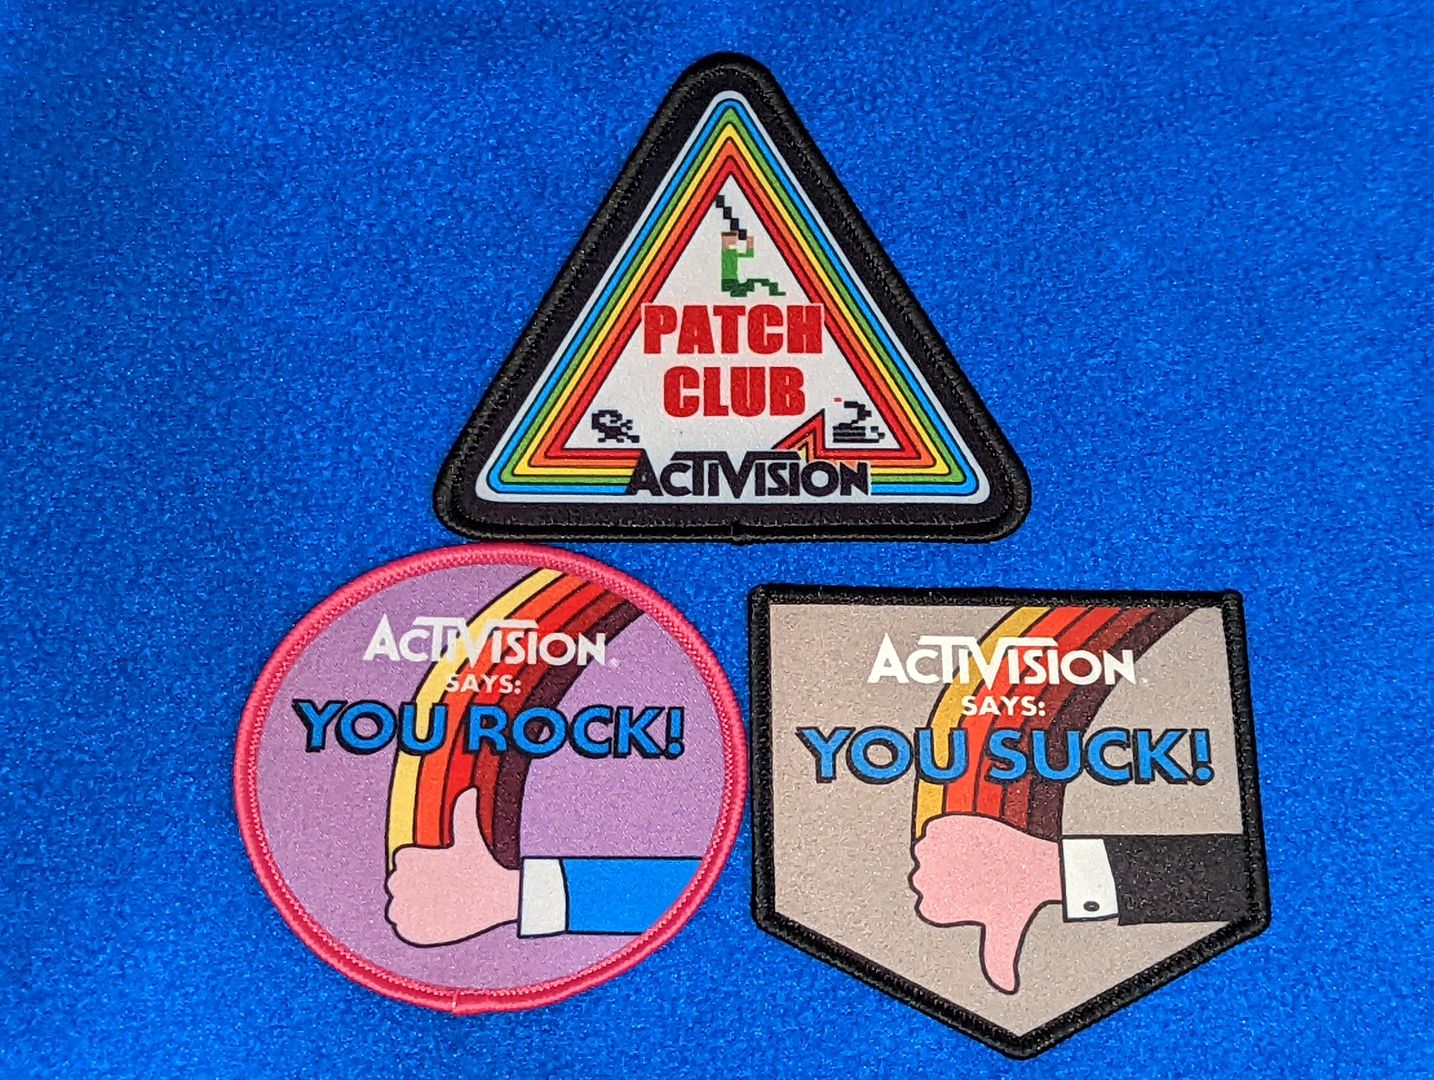 Activision_Patches_(26).jpg